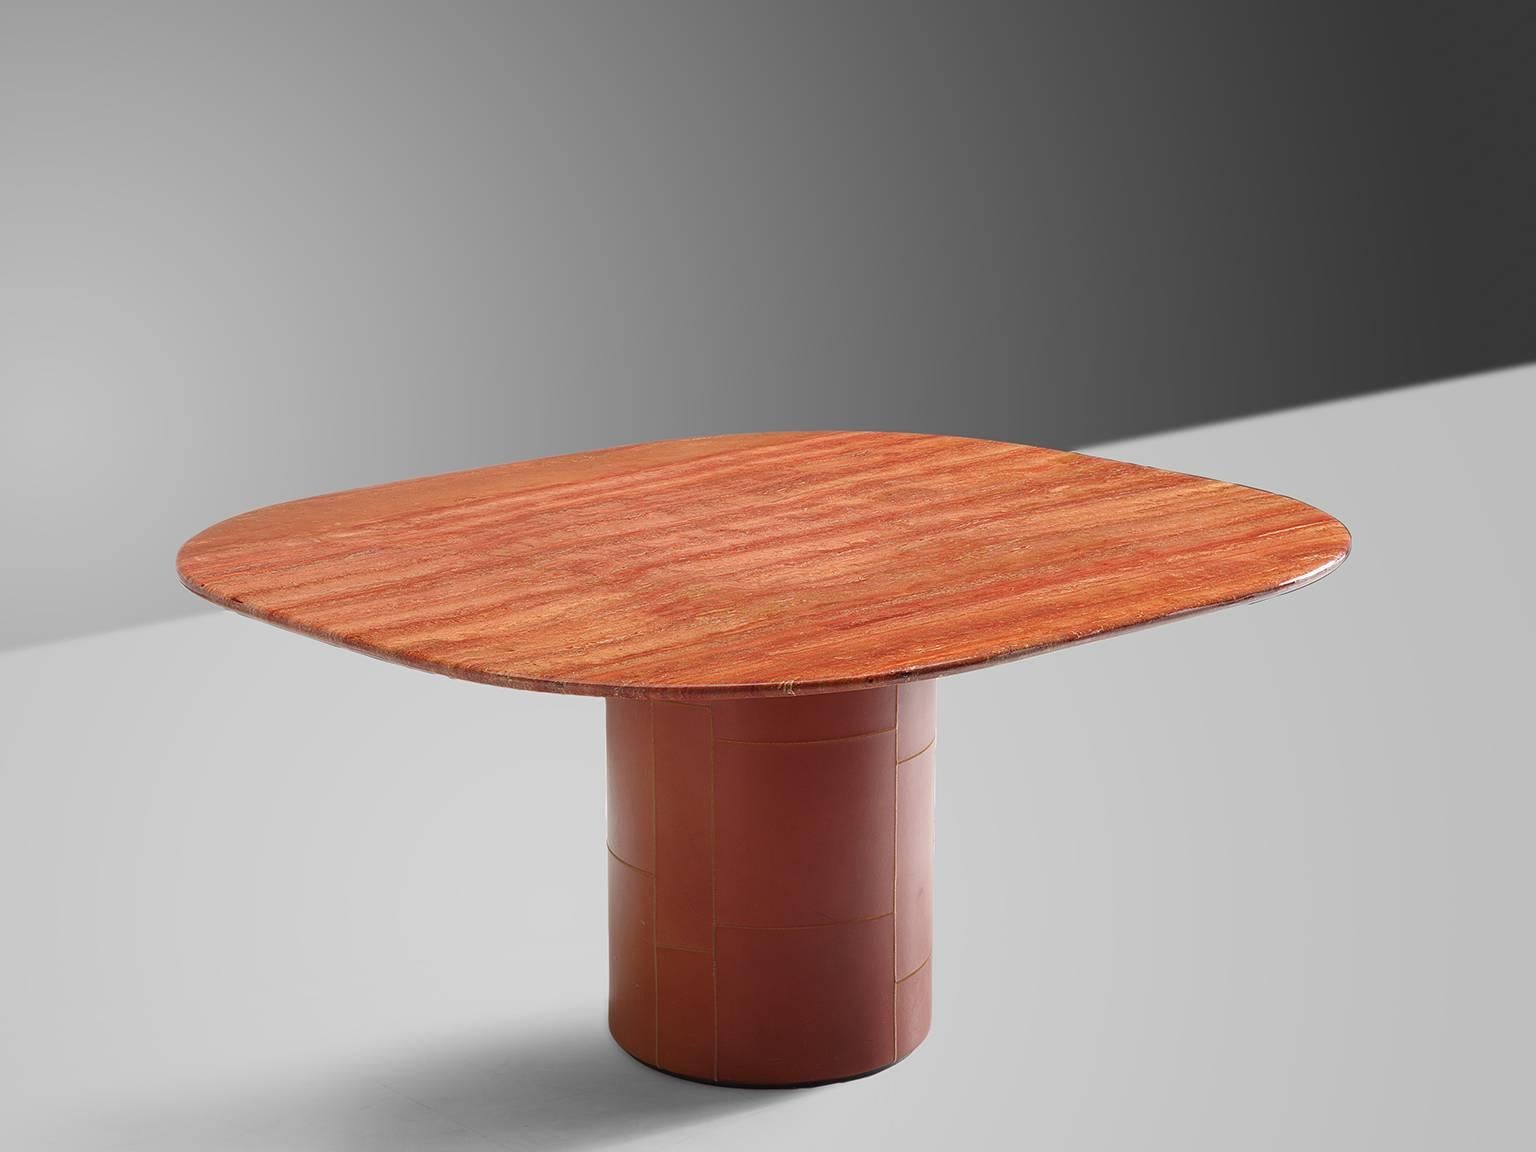 Dining table, in red travertine and leather, for B&B Italia, Italy 1970s.

Centre table with leather base and top of red travertine. The combination of material, leather and travertine, from a strong contrast. The red to orange colored travertine